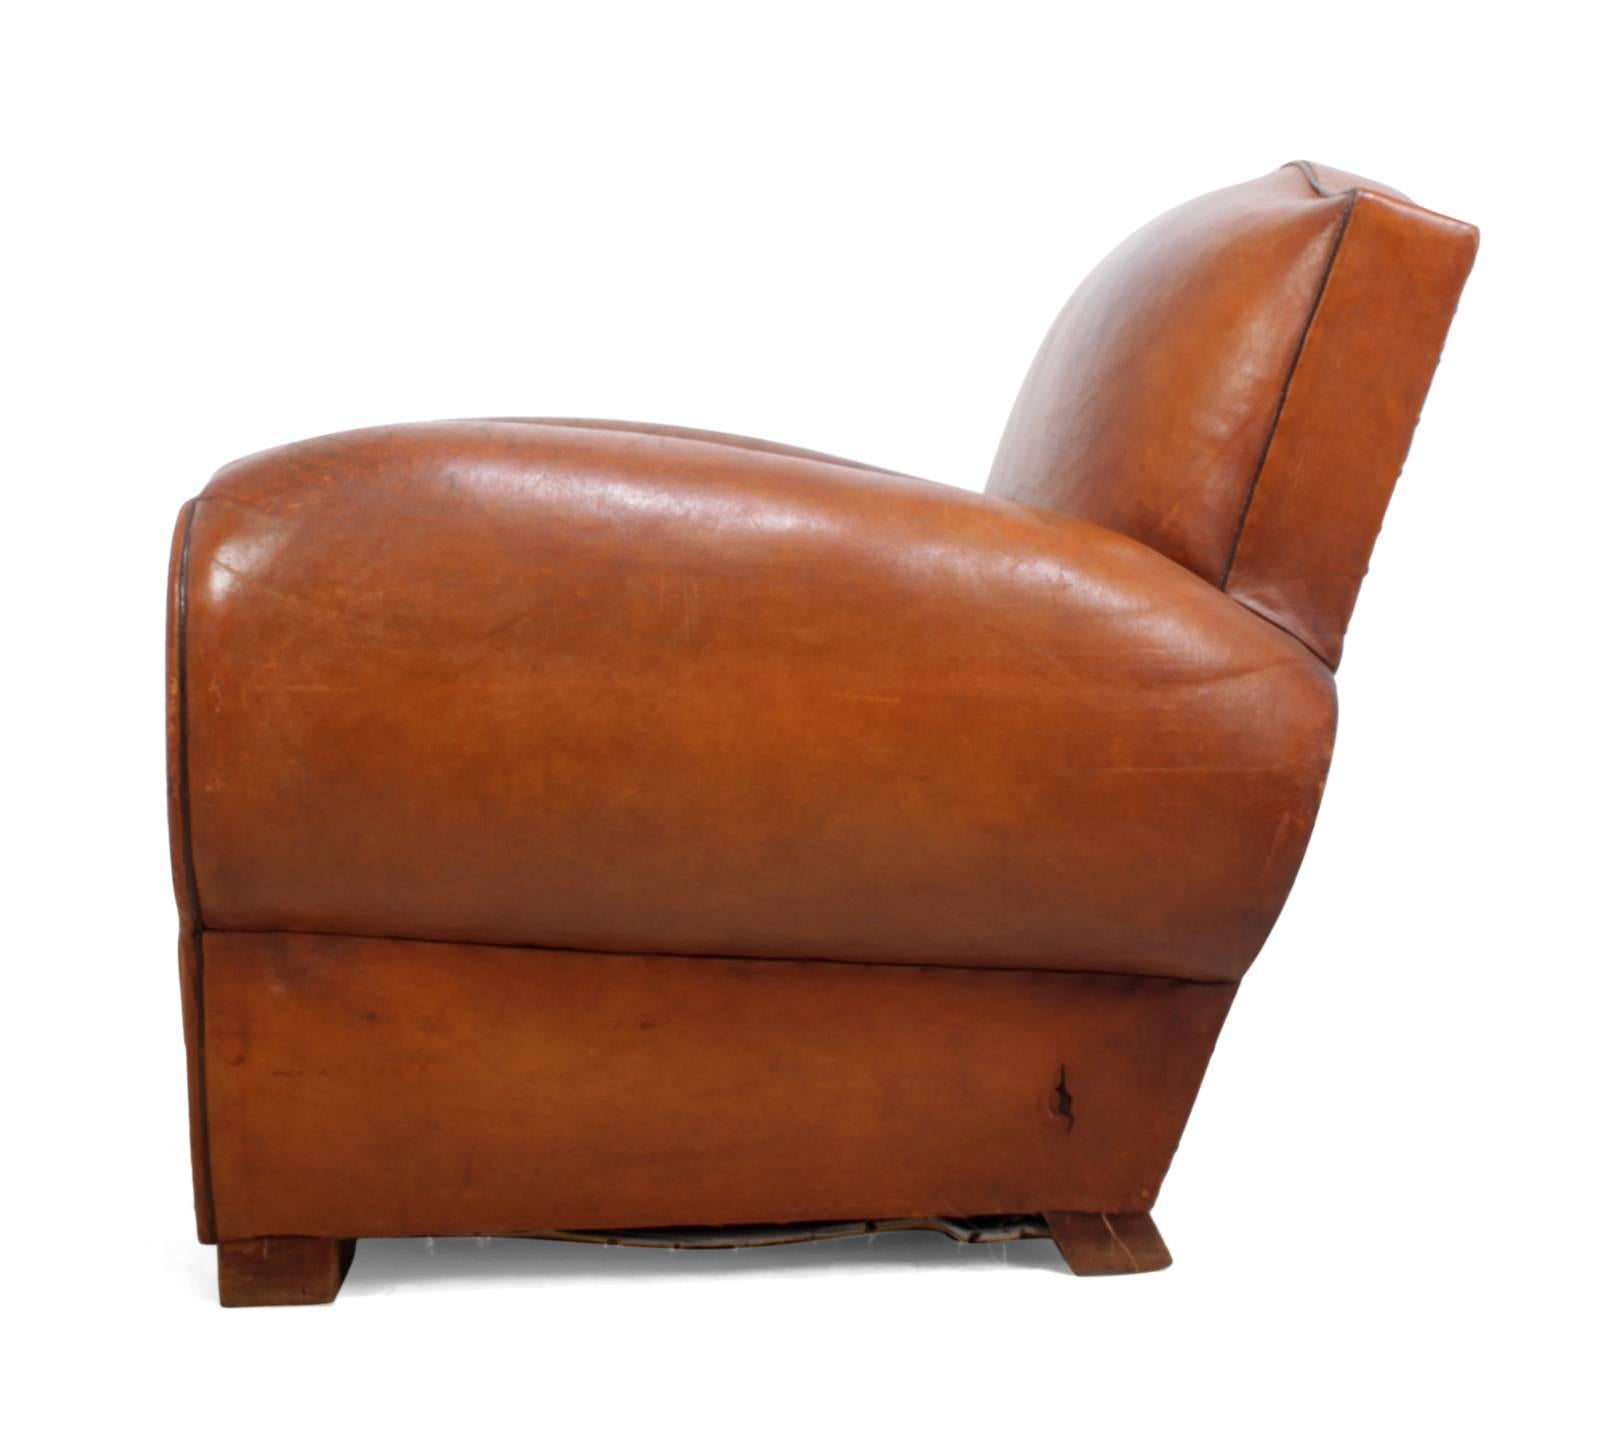 Mid-20th Century French Leather Club Chair, circa 1930